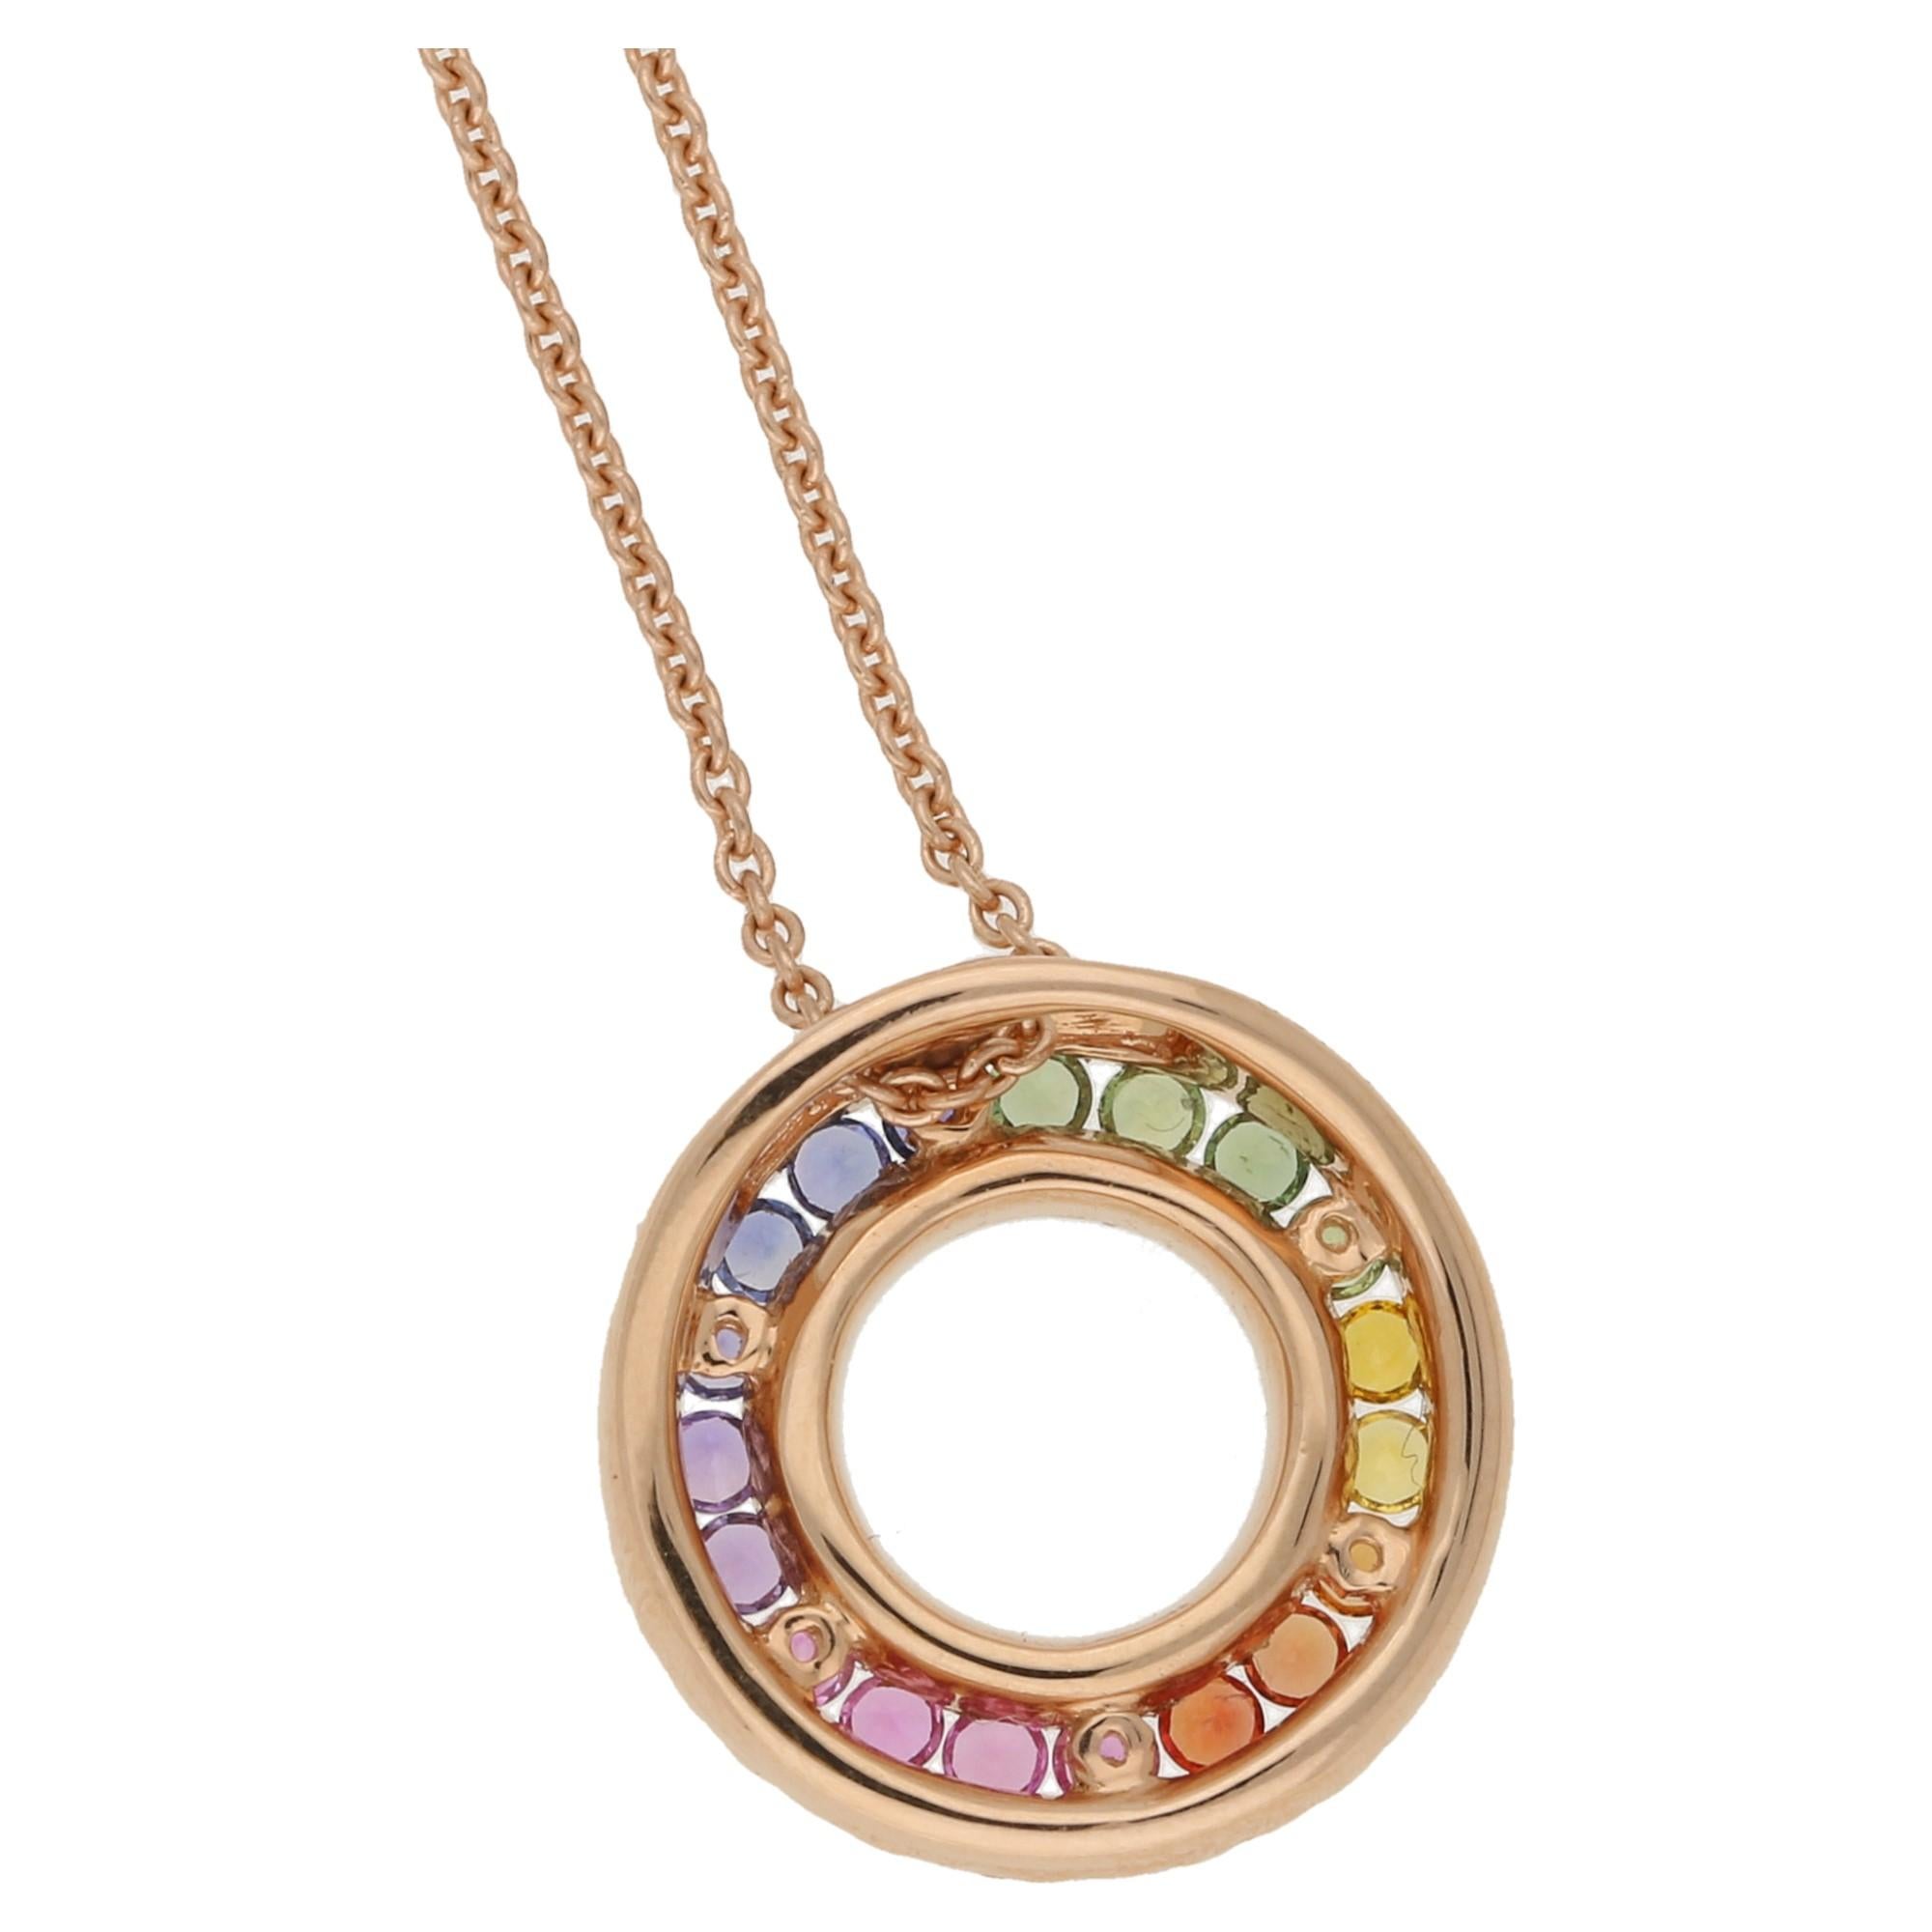 A beautiful rose gold pendant on chain. The pendant is made from a gorgeous array of rainbow sapphires, these total 0.47ct's. These are complimented by 0.33ct's of round brilliant diamonds running in two rows either side of the sapphires. The chain